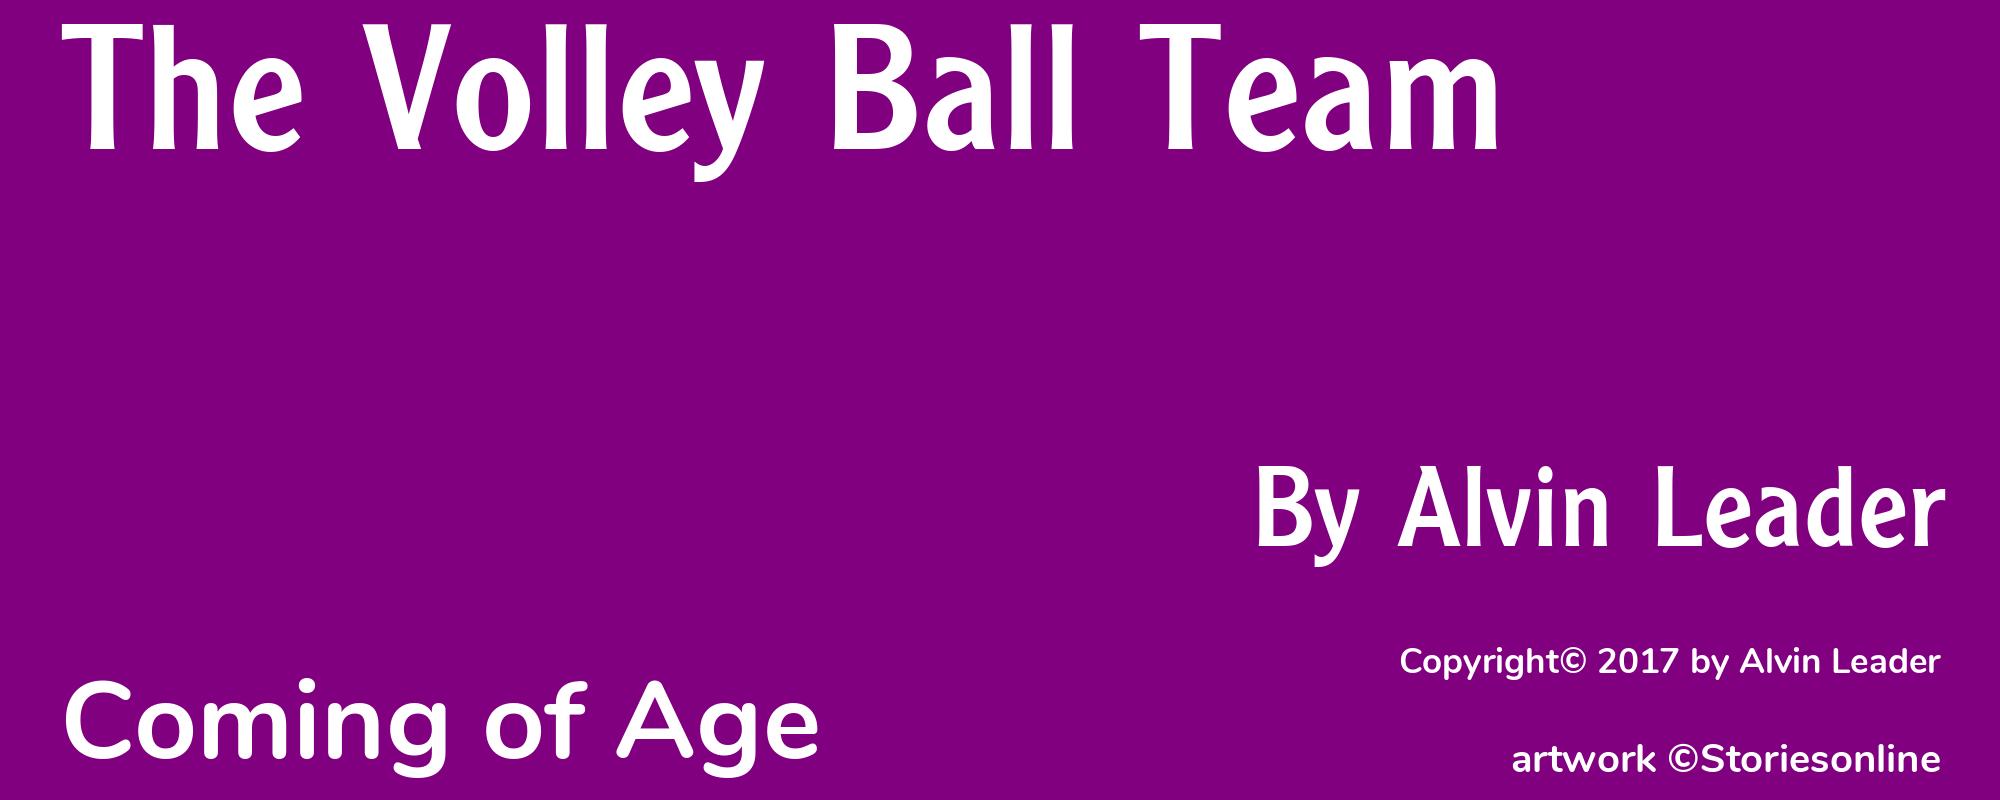 The Volley Ball Team - Cover